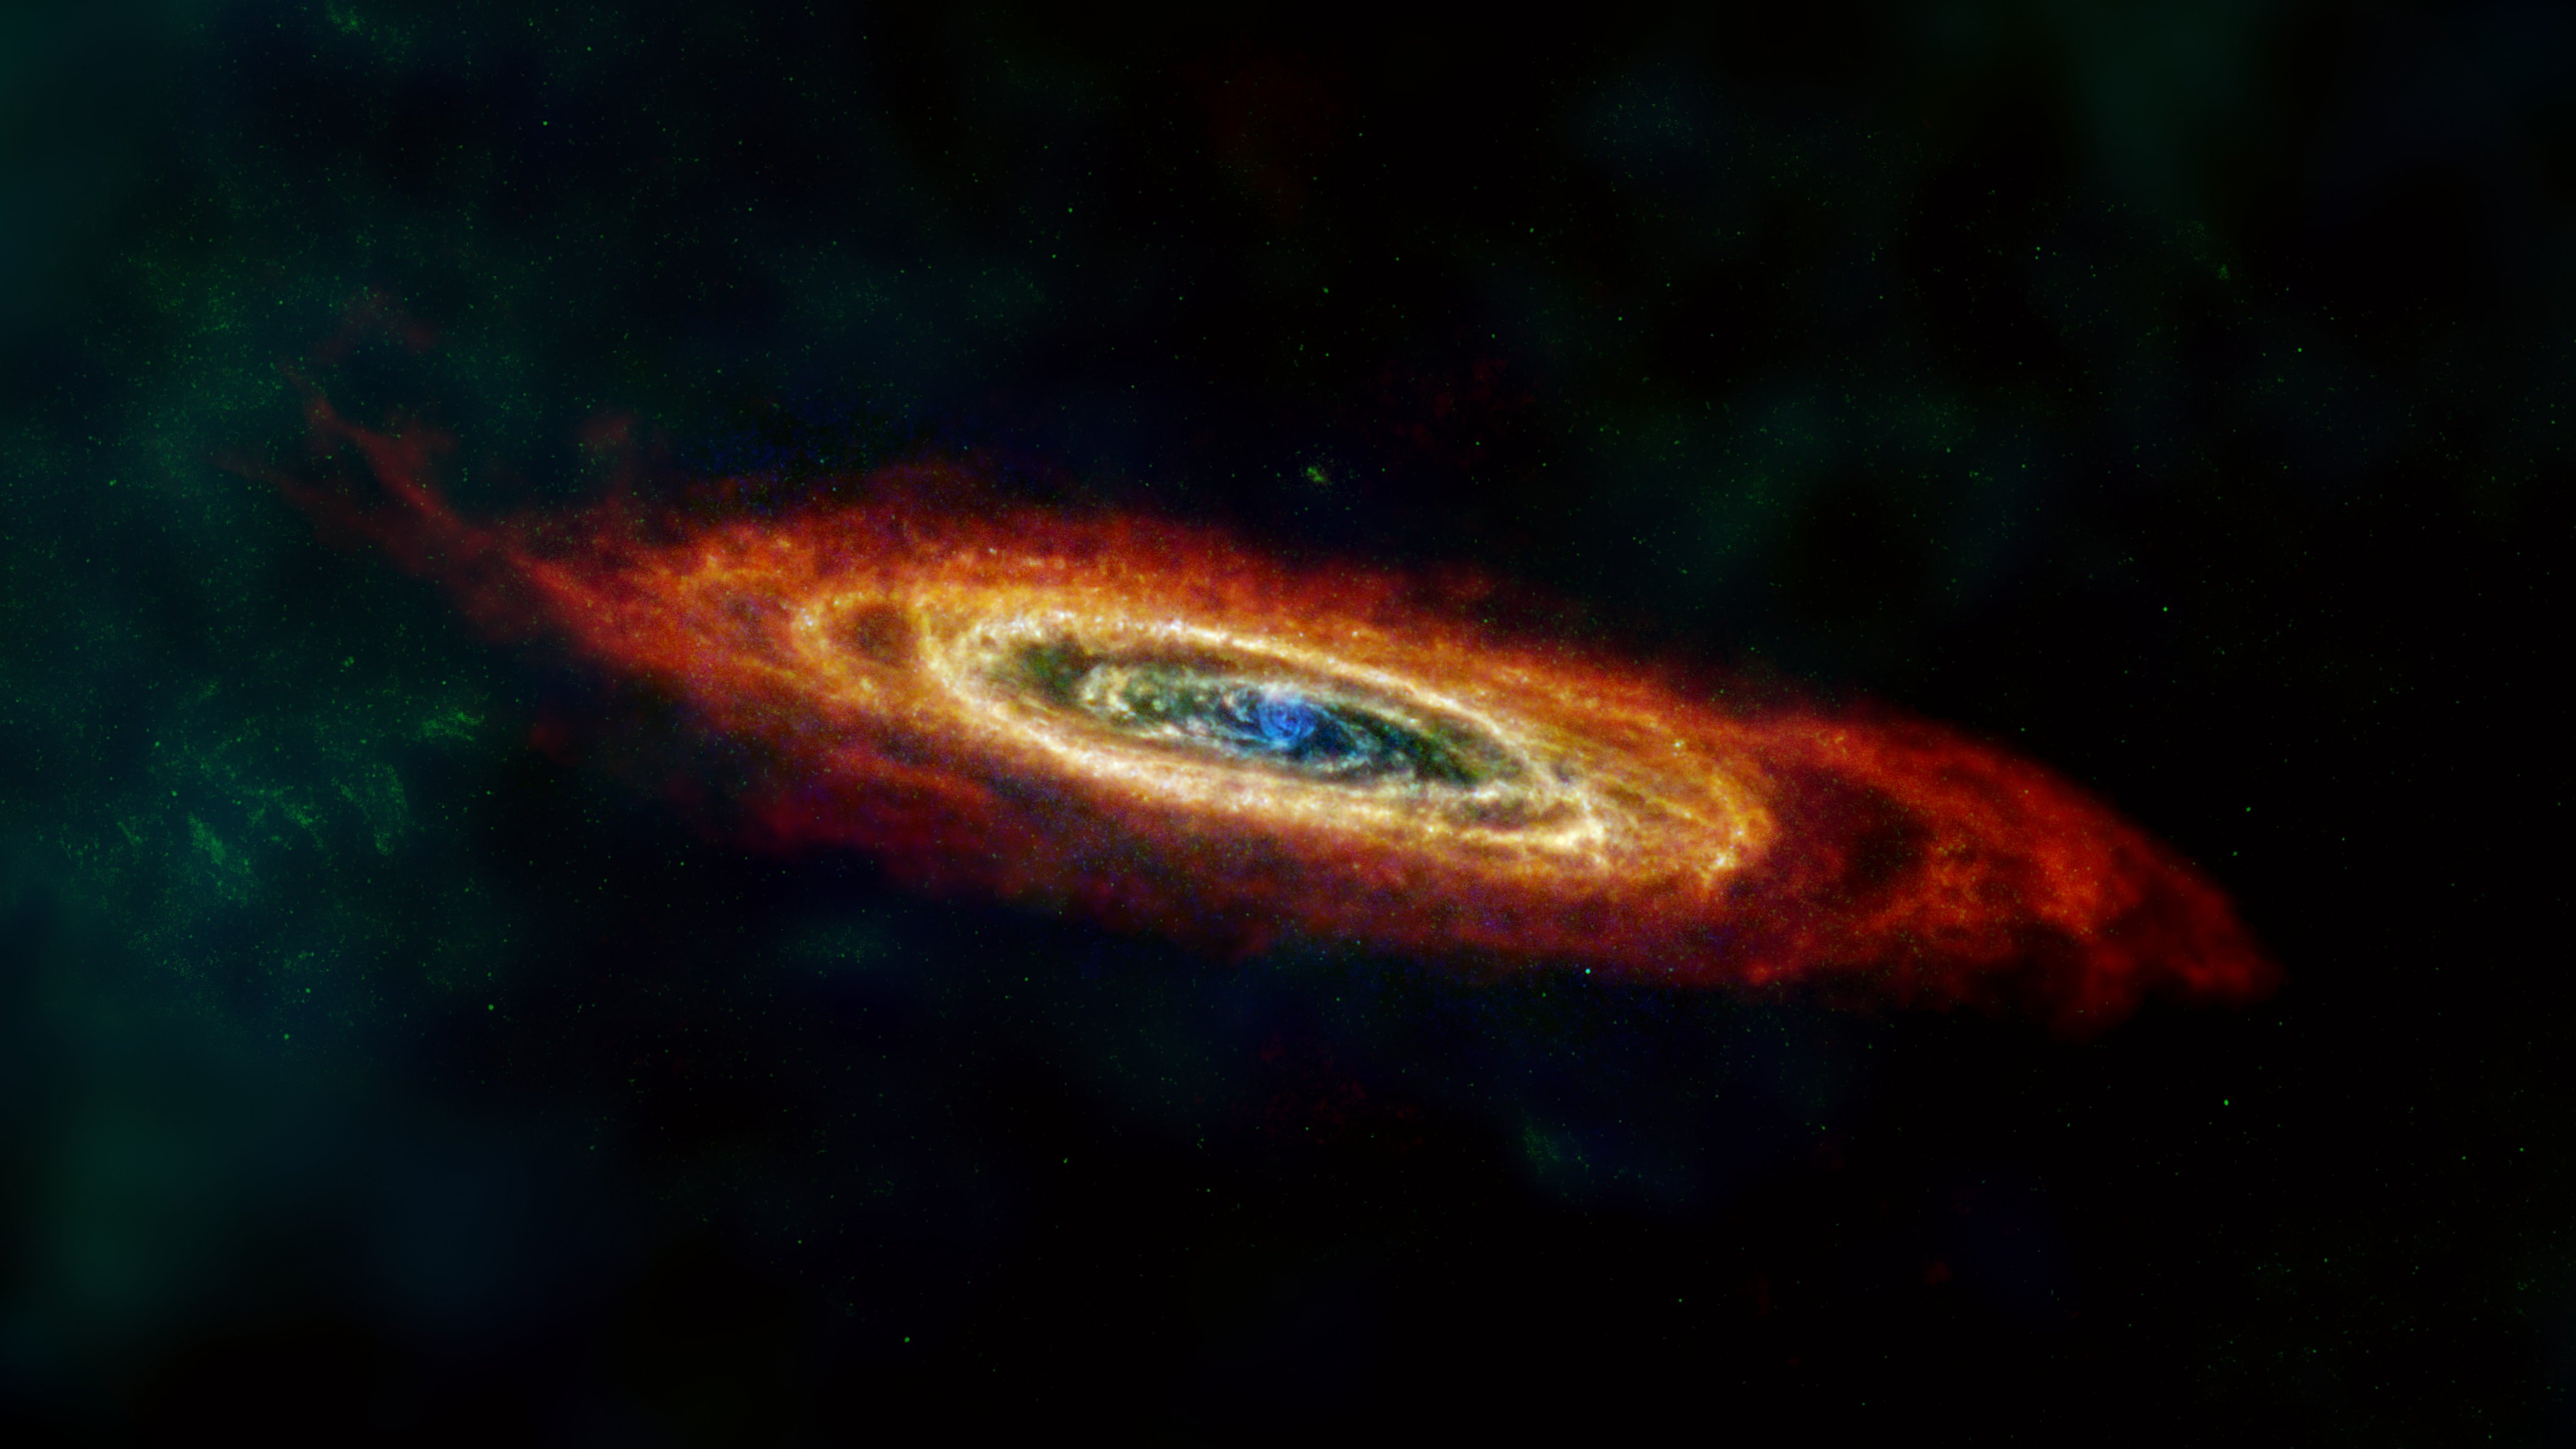 Check out this breathtaking picture of our neighbouring galaxy Andromeda captured by NASA/ESA telescopes